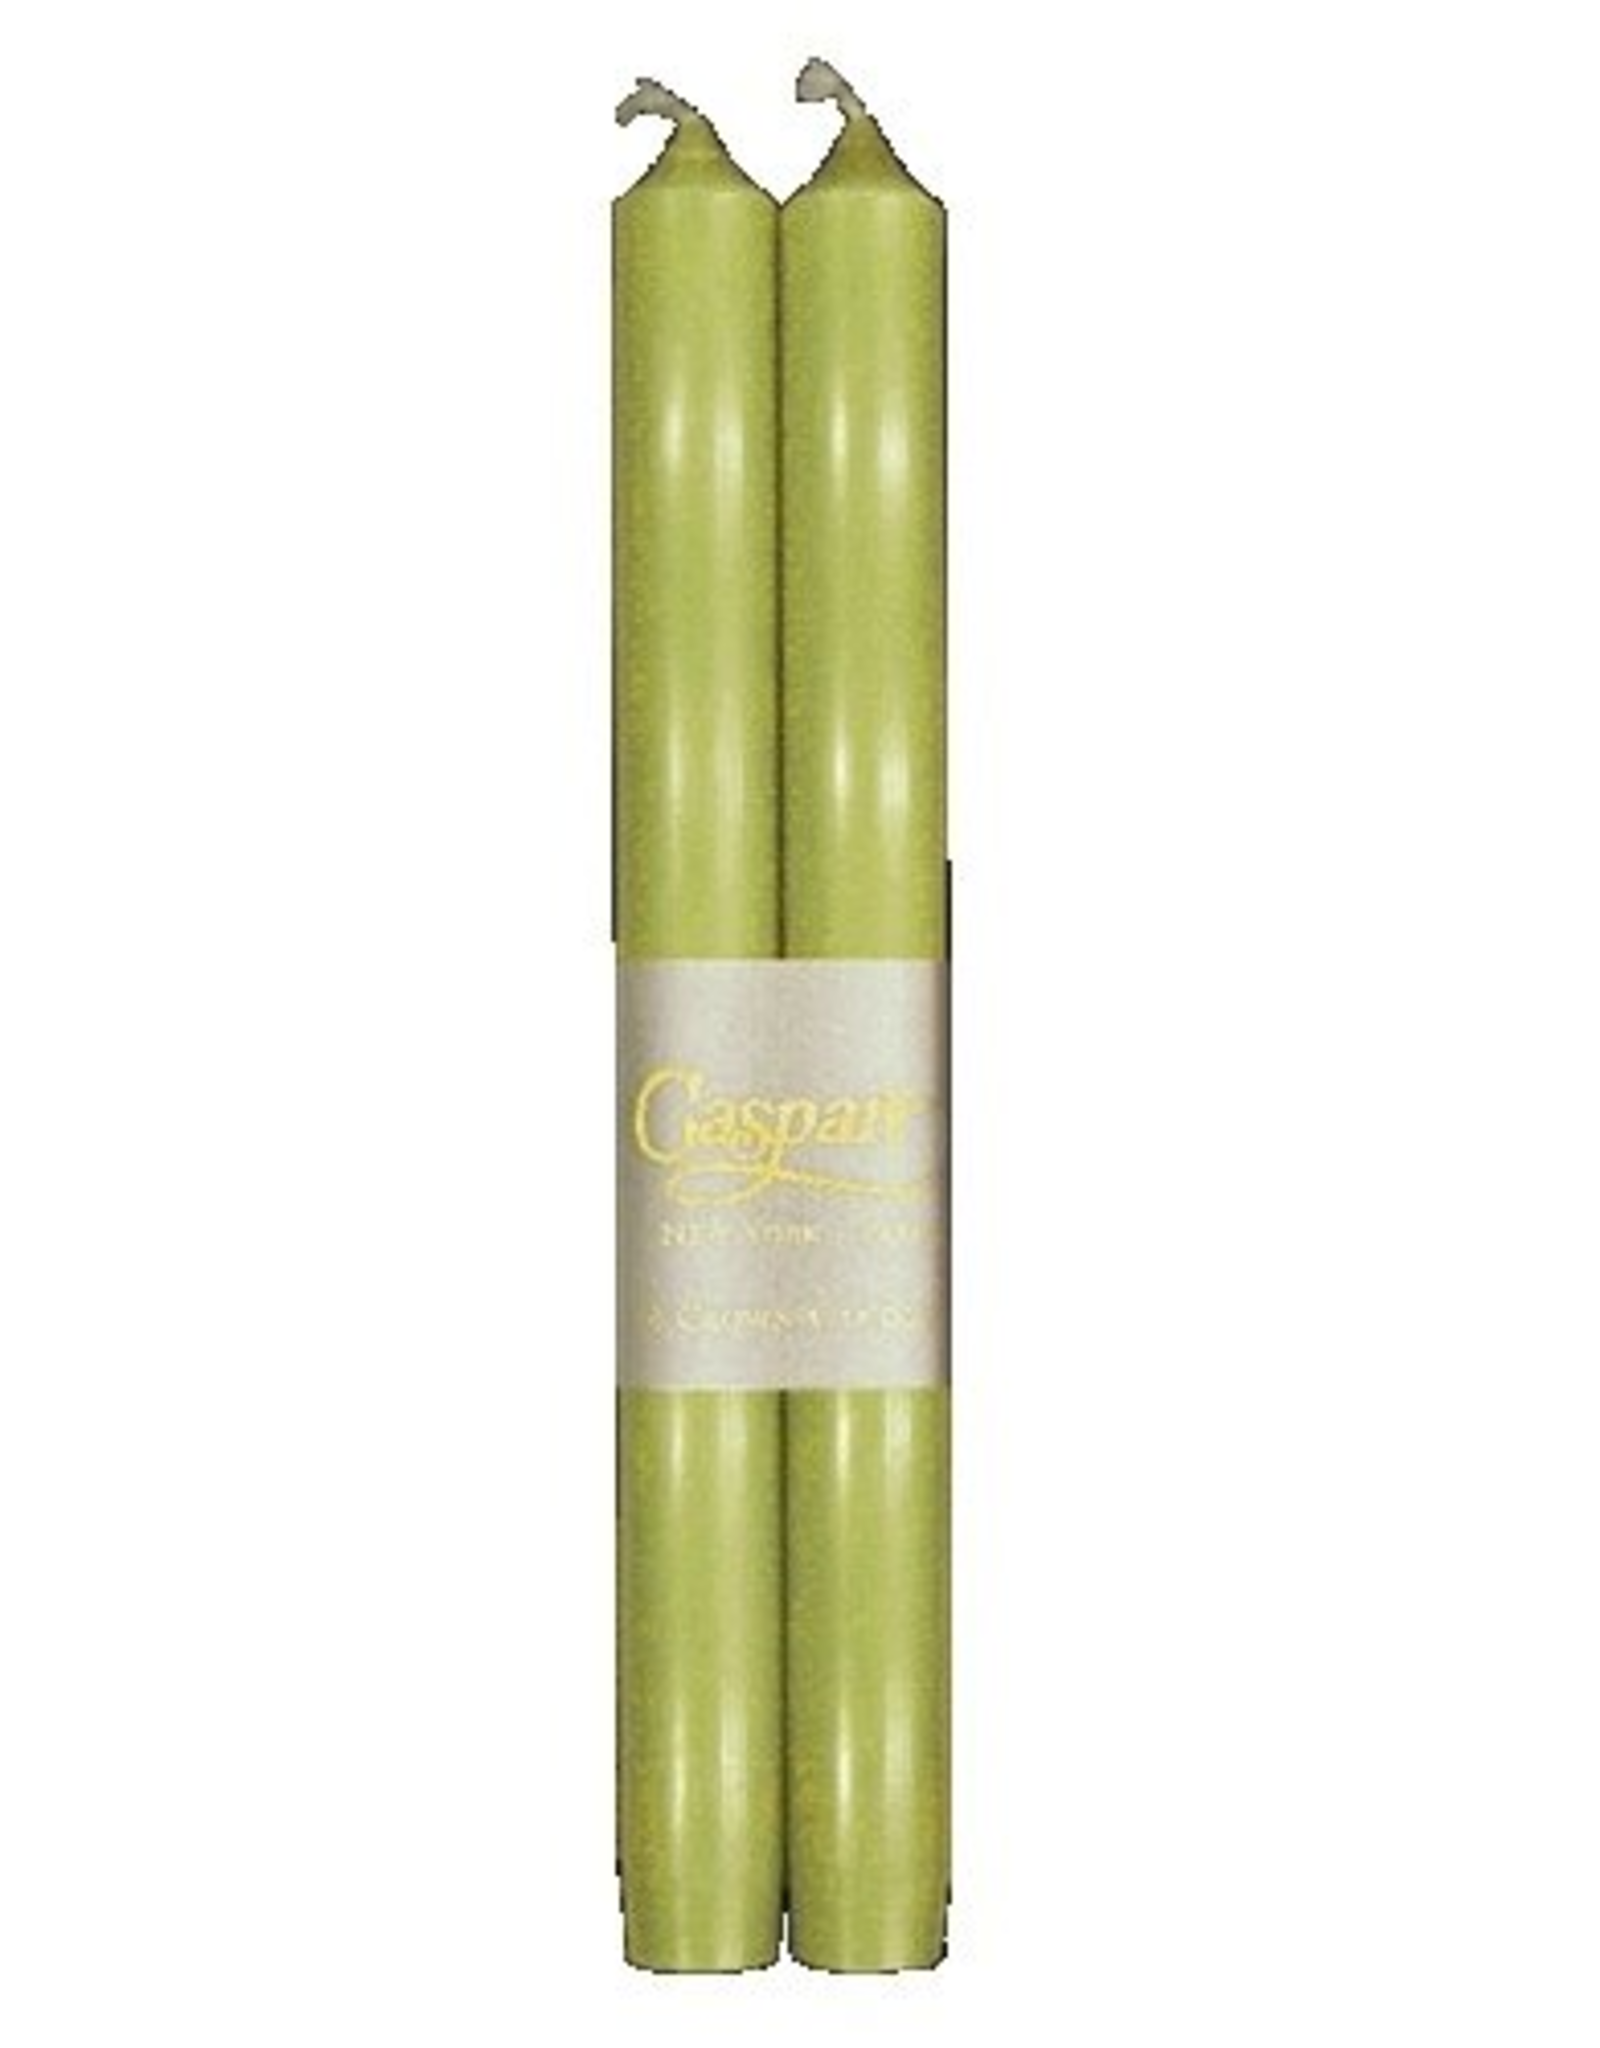 Caspari Crown Candles Tapers 10 inch 2pk Moss Green